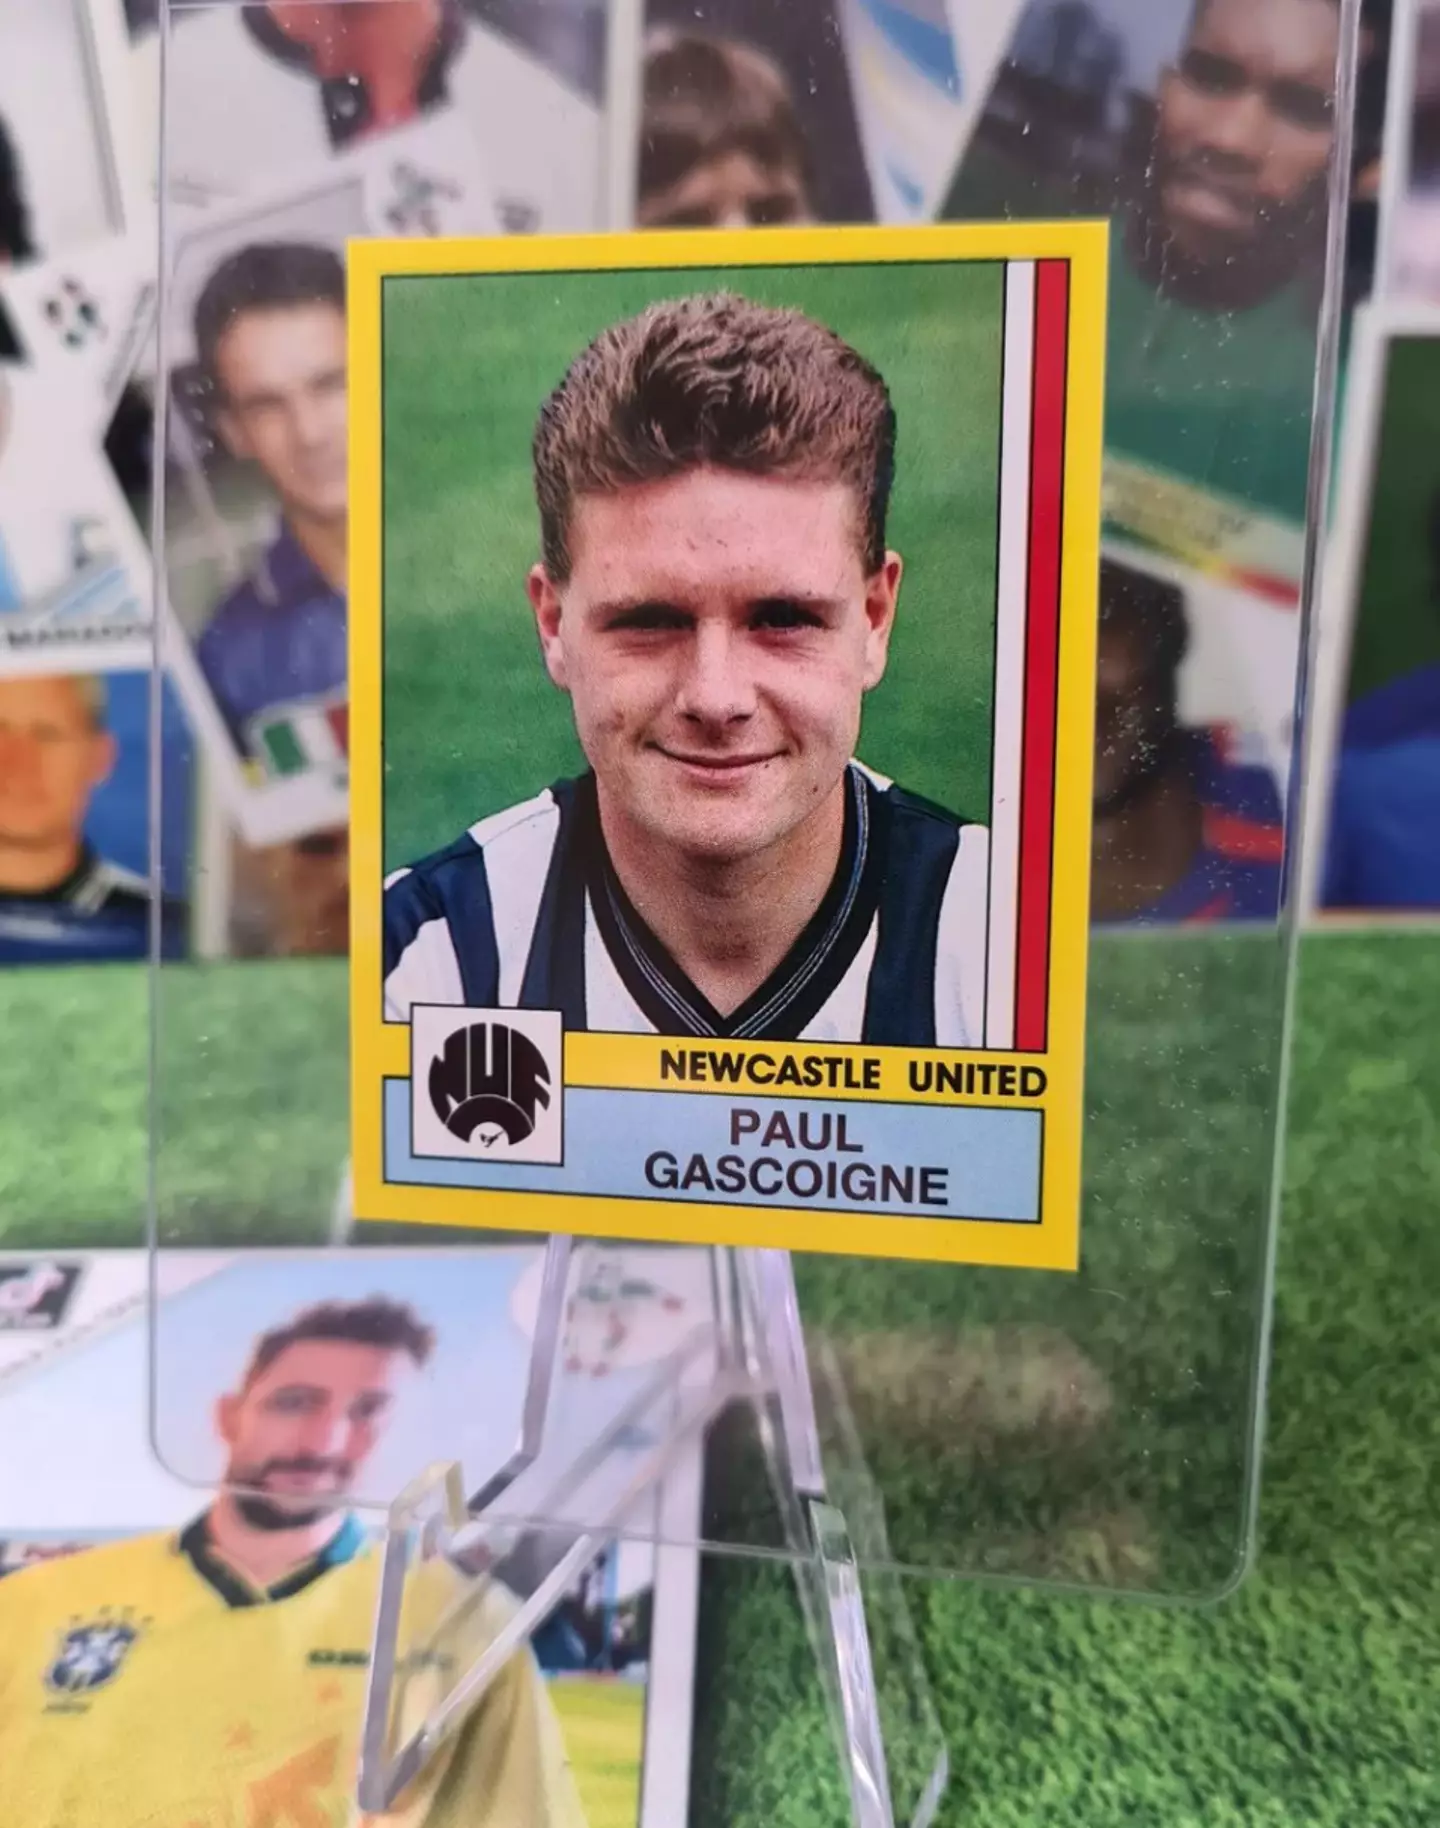 Paul Gascoigne's first ever Panini football sticker. Image credit: Instagram/paolopaniniofficial